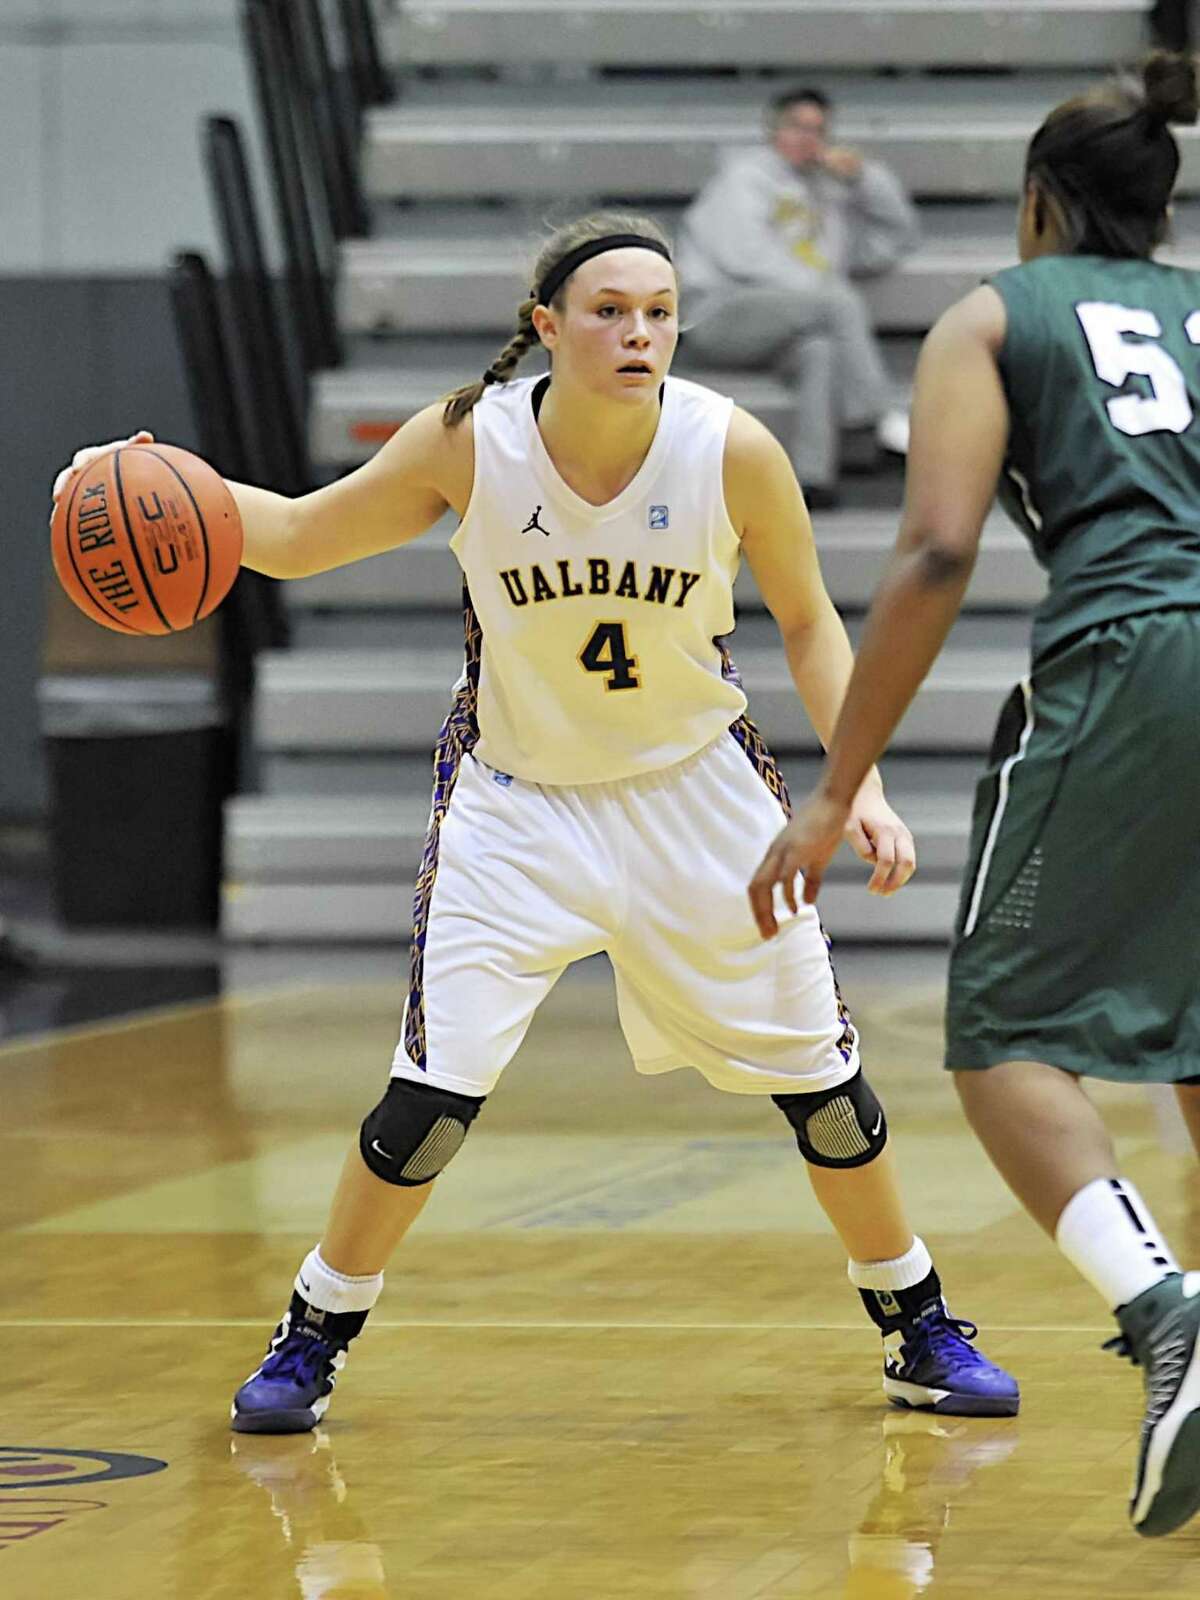 Torrington alum and current University at Albany guard Sarah Royals made history by tying the single-game NCAA assists record Wednesday afternoon. University at Albany